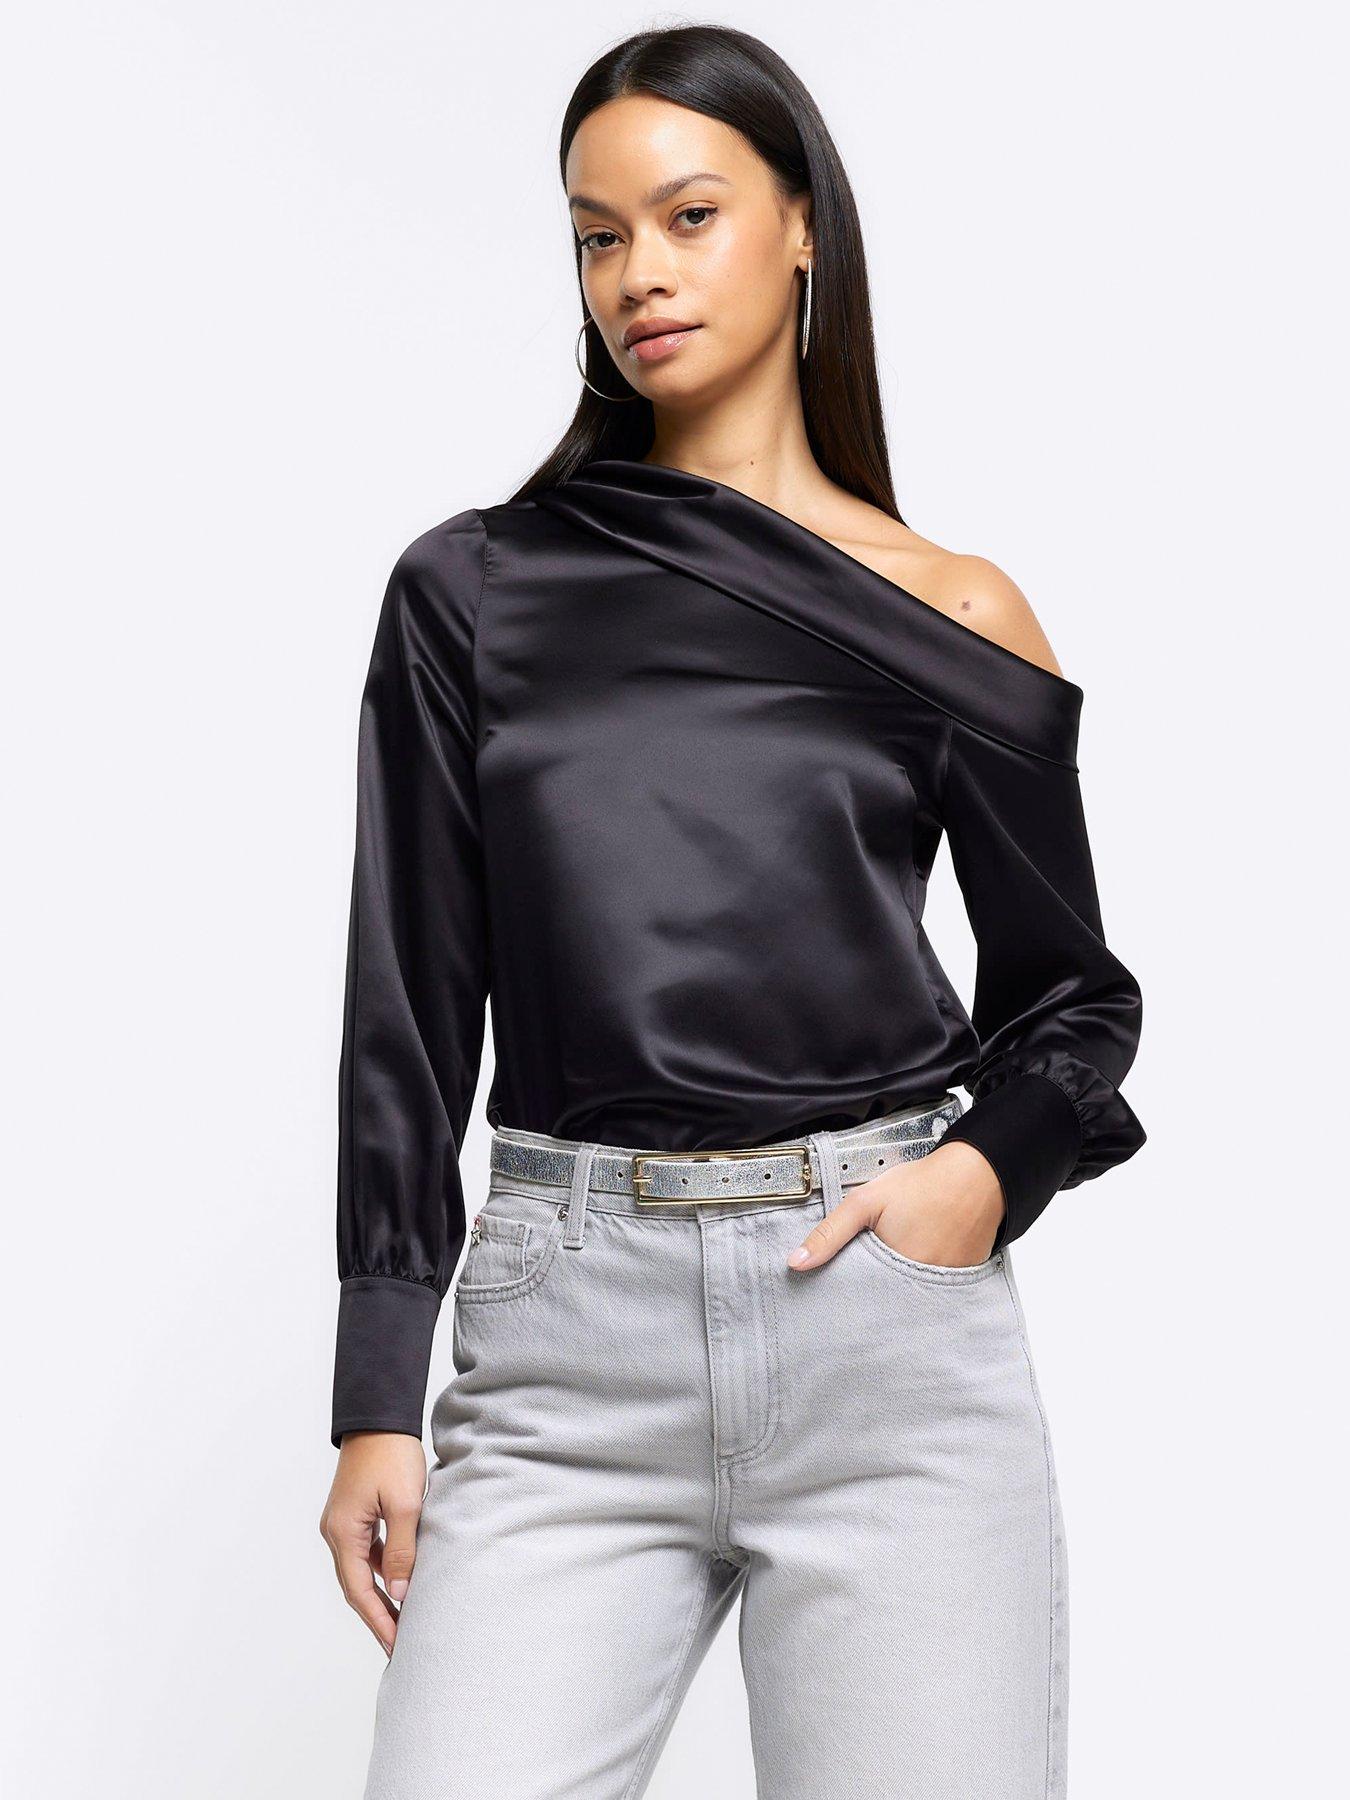 Black, Going Out Tops, Tops & t-shirts, Women